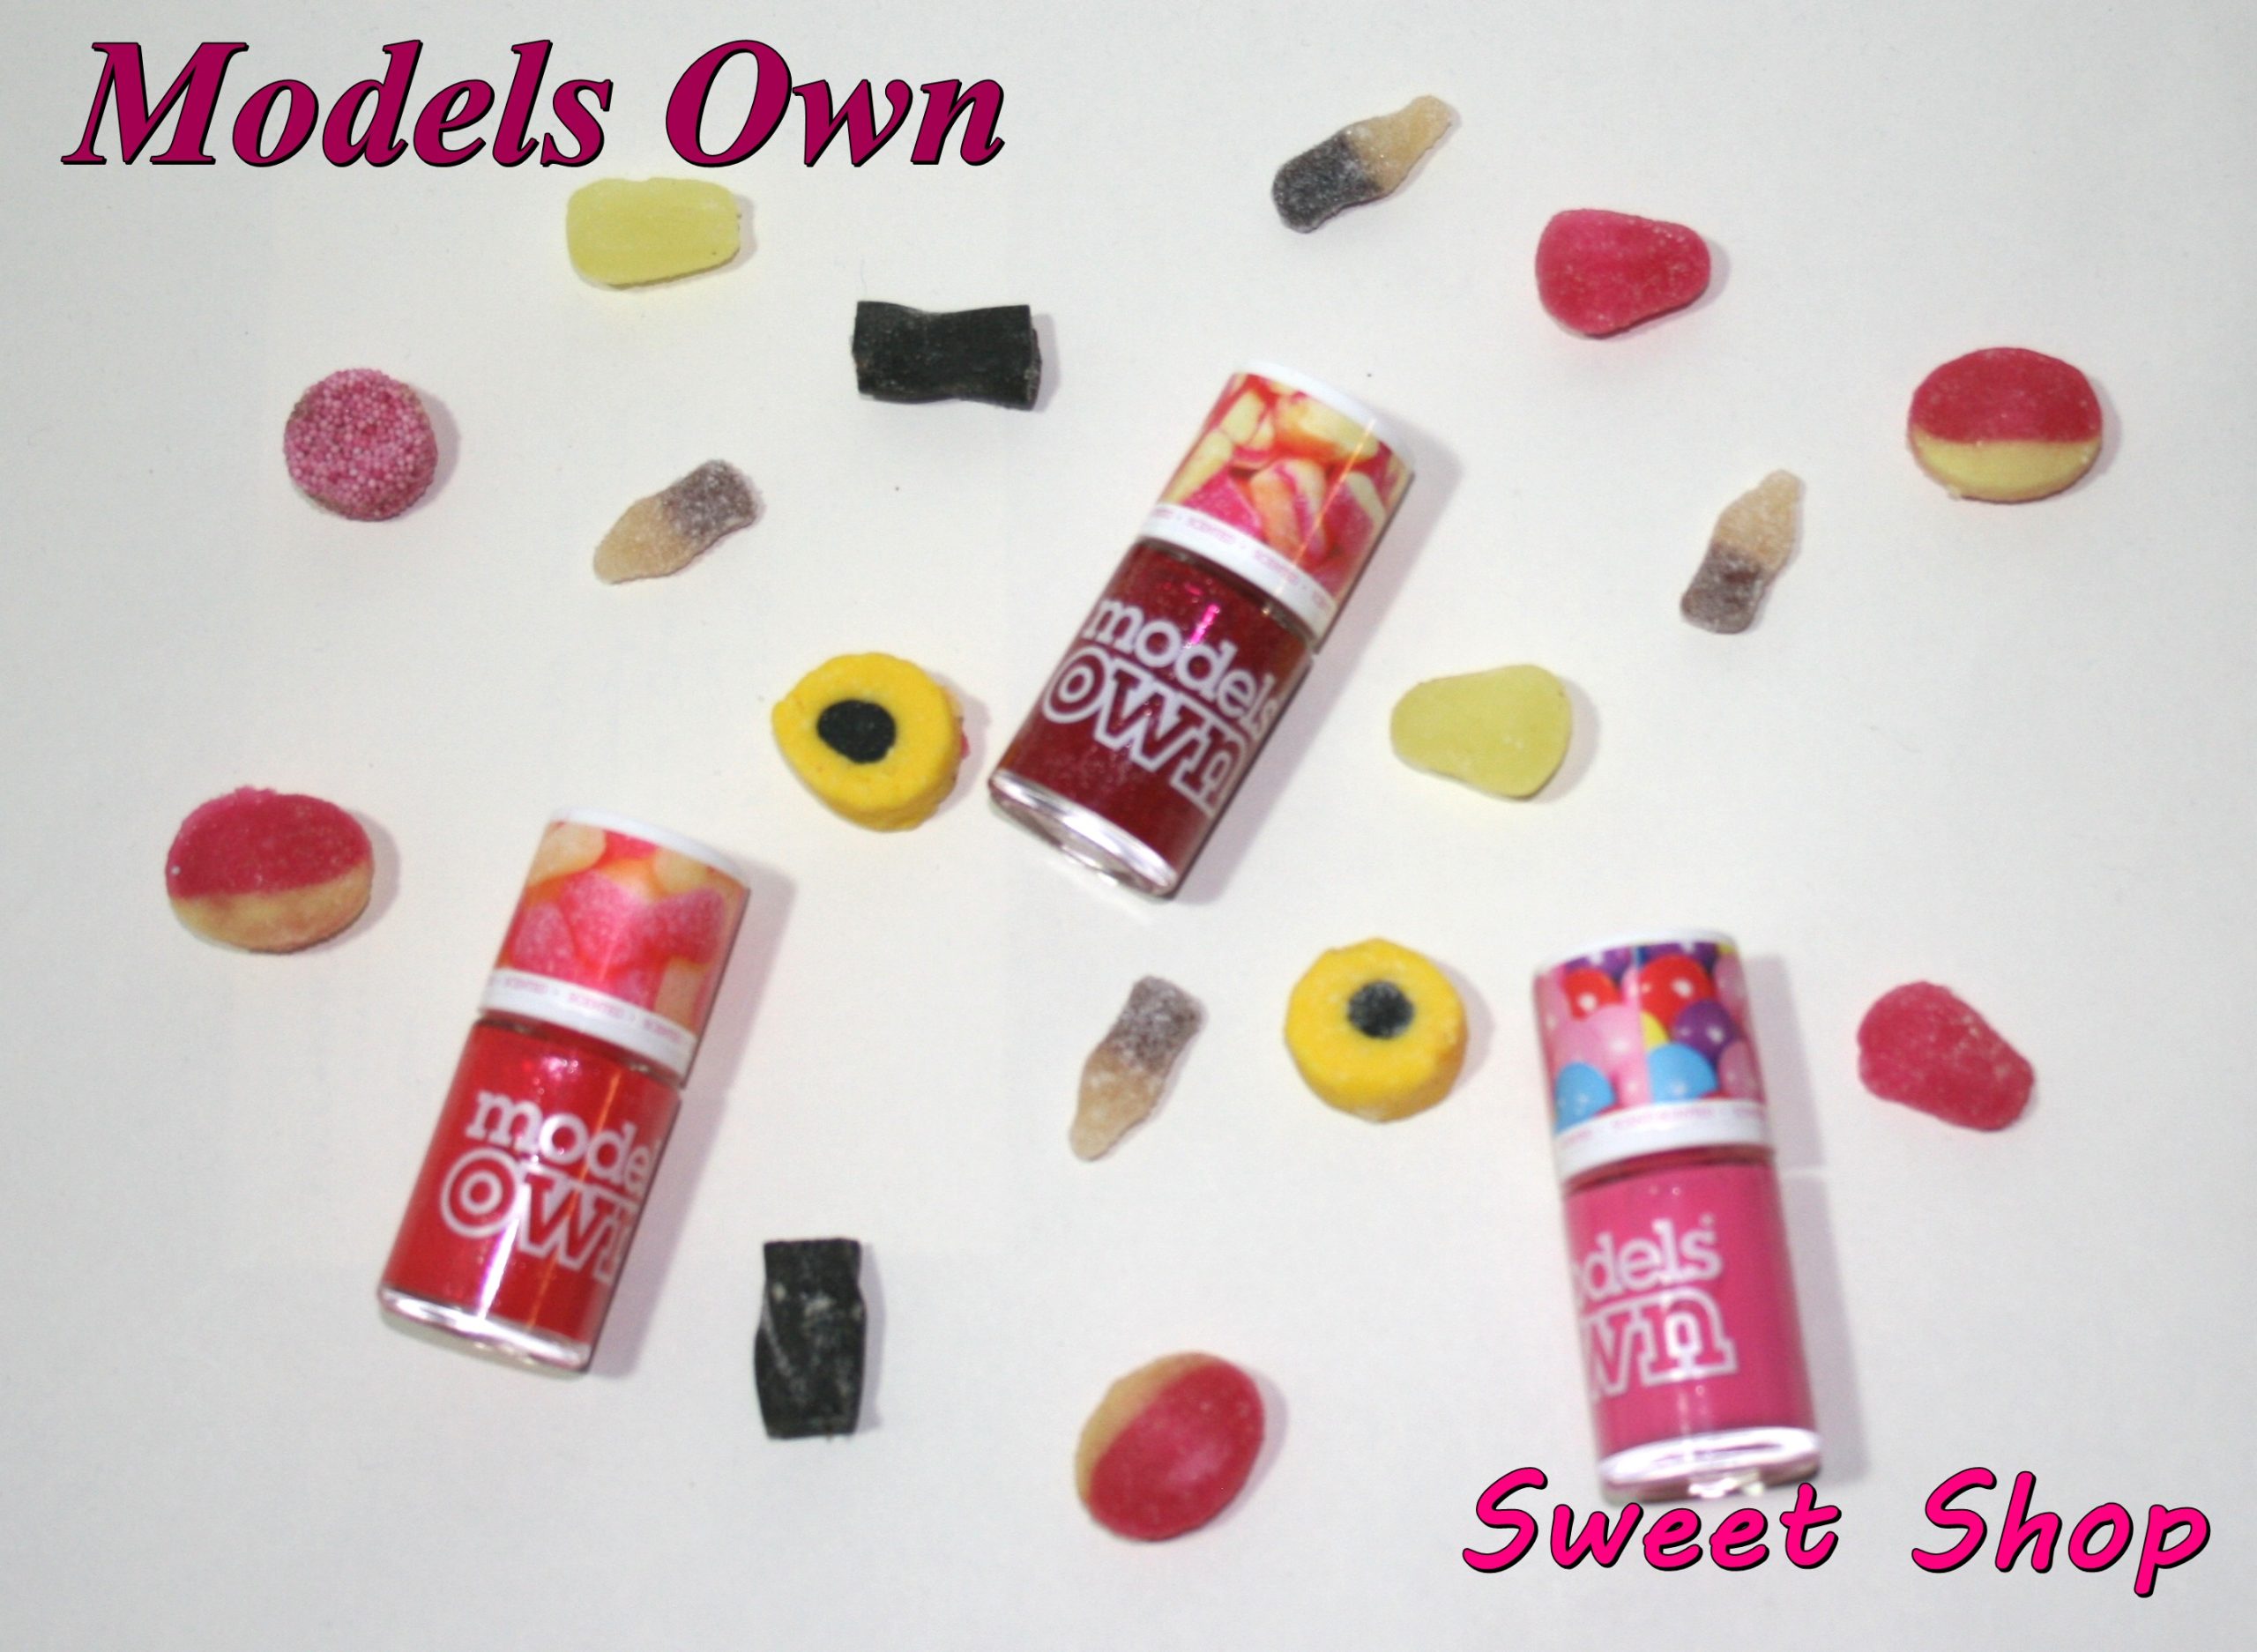 Models Own Sweet Shop in Rhubarb and Custard, Gumballs and Pear Drops